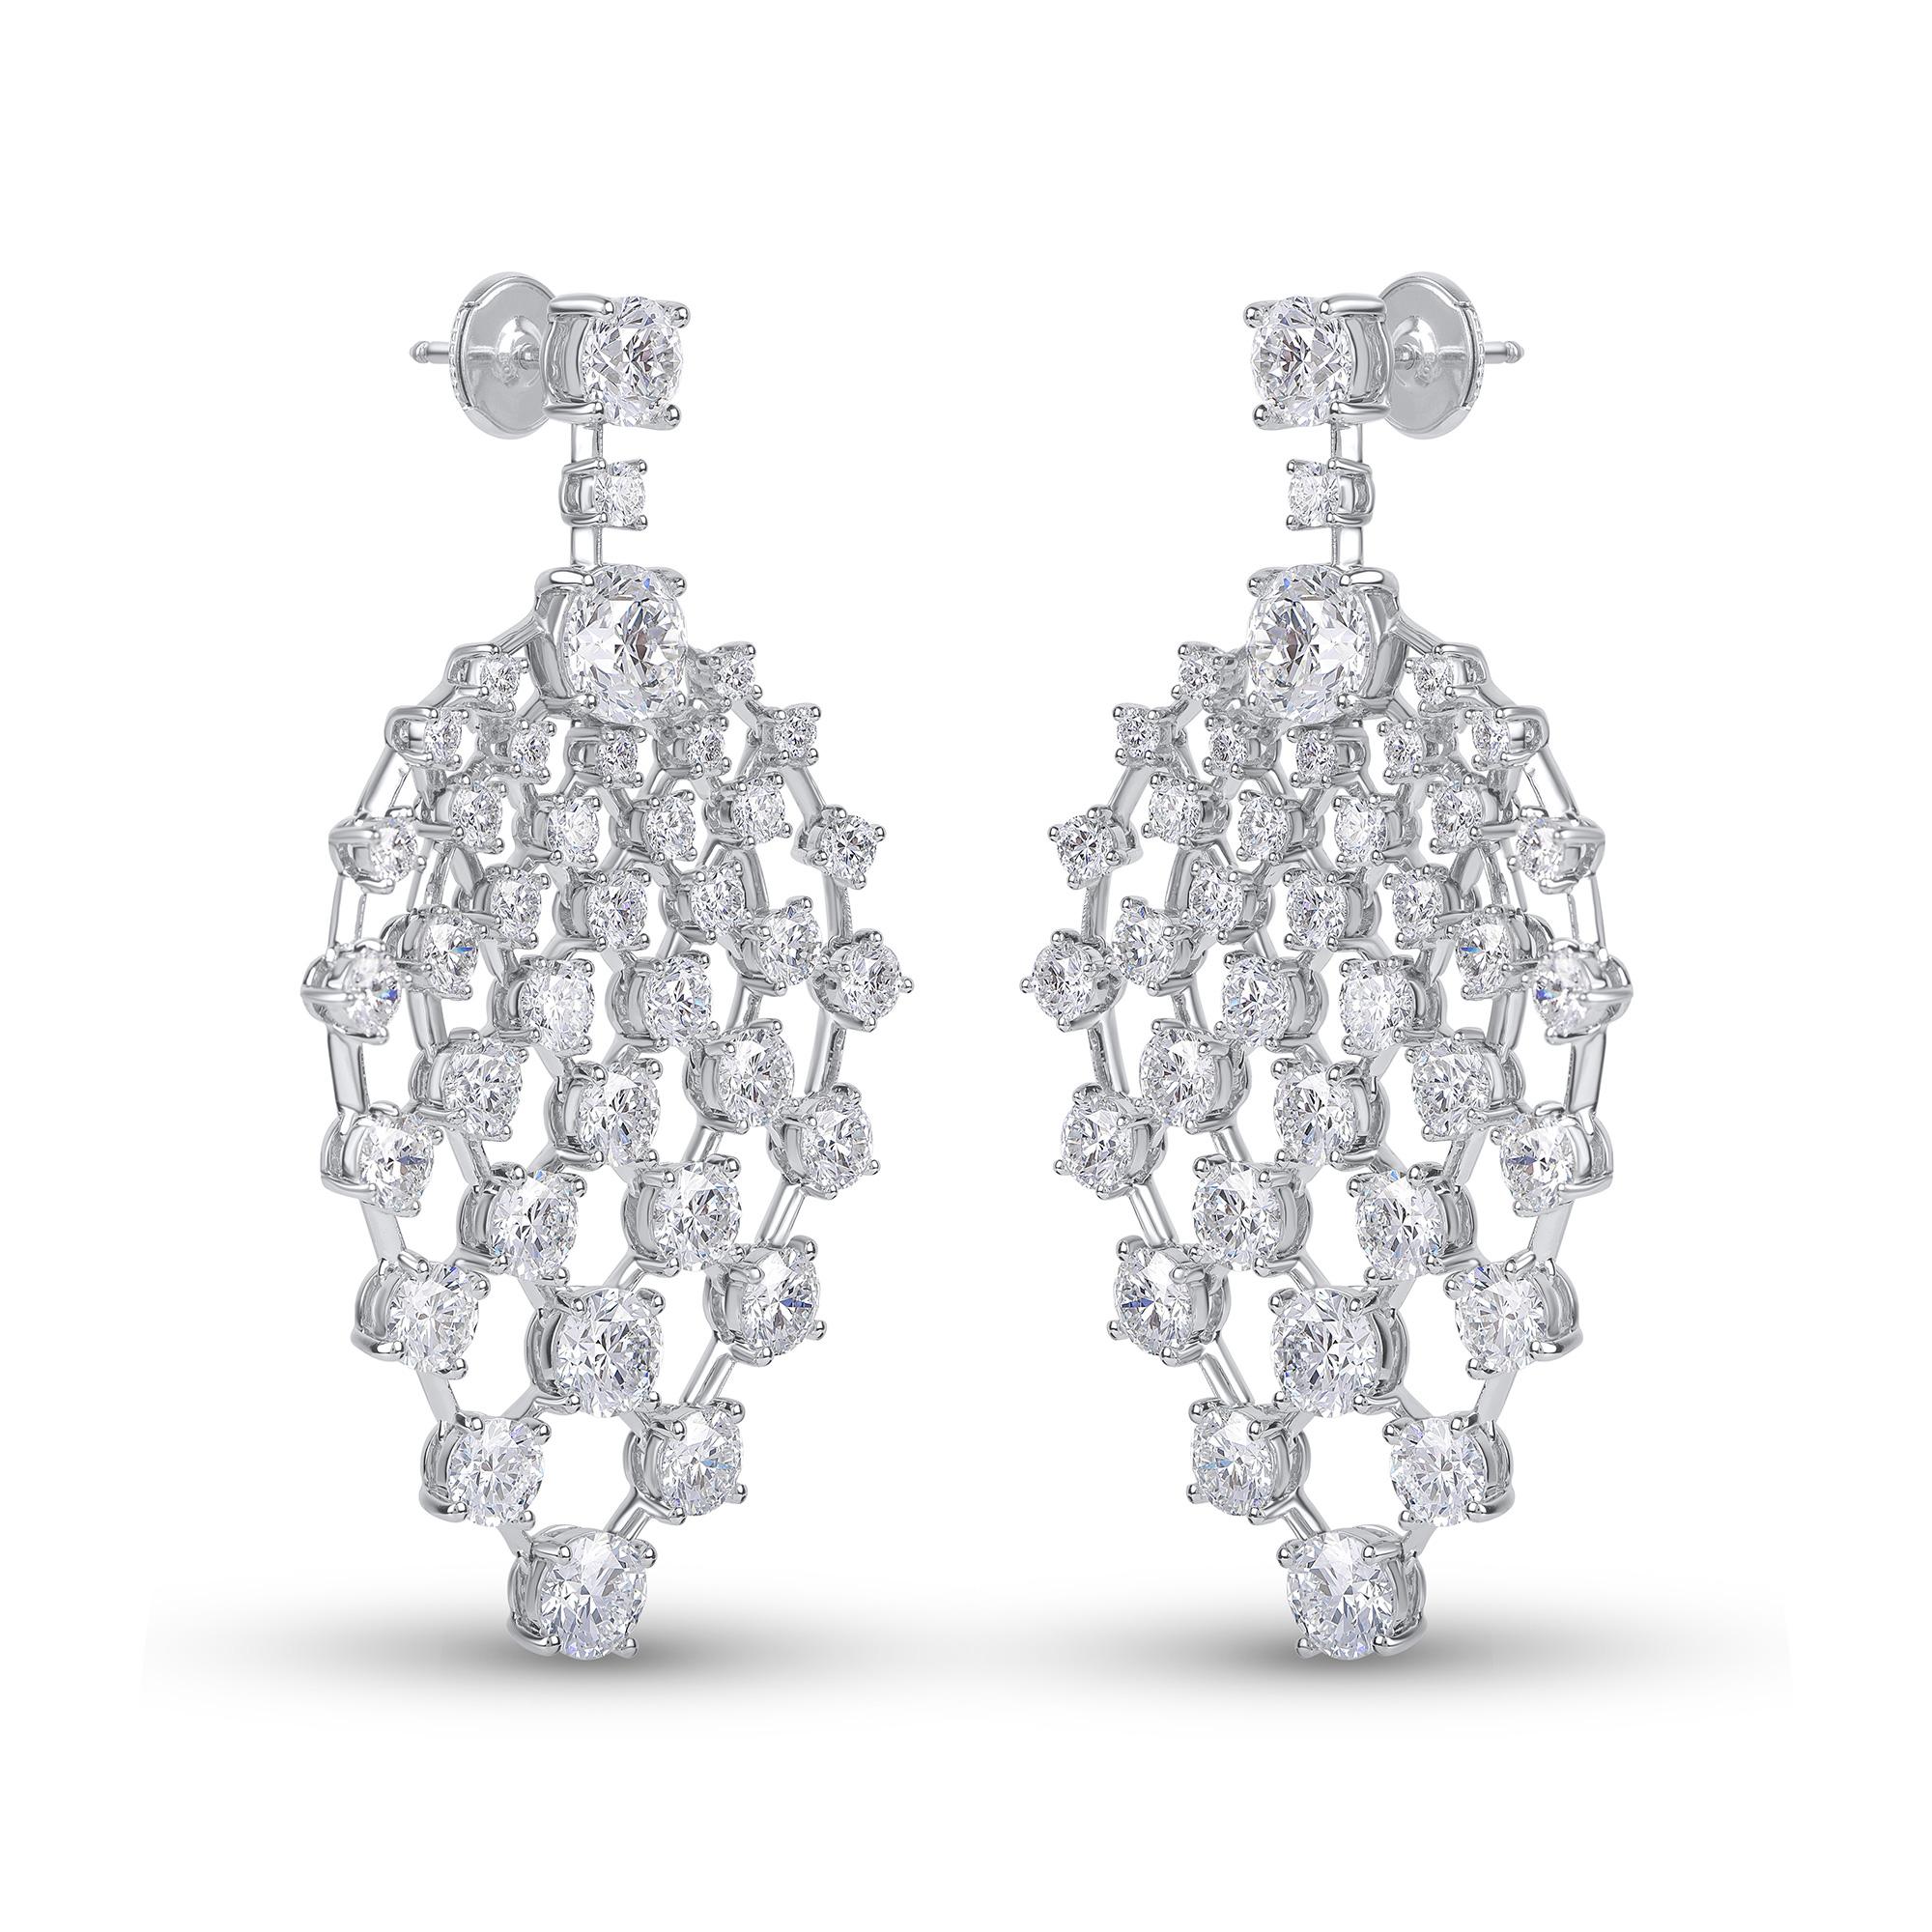 This pair of dangling earrings is beautifully set with an star-like arrangement of 76 brilliant cut diamonds in claw setting, in a unique design, reminiscent of stars Illuminating the night skies. The total diamond weight of these earrings is 12.80